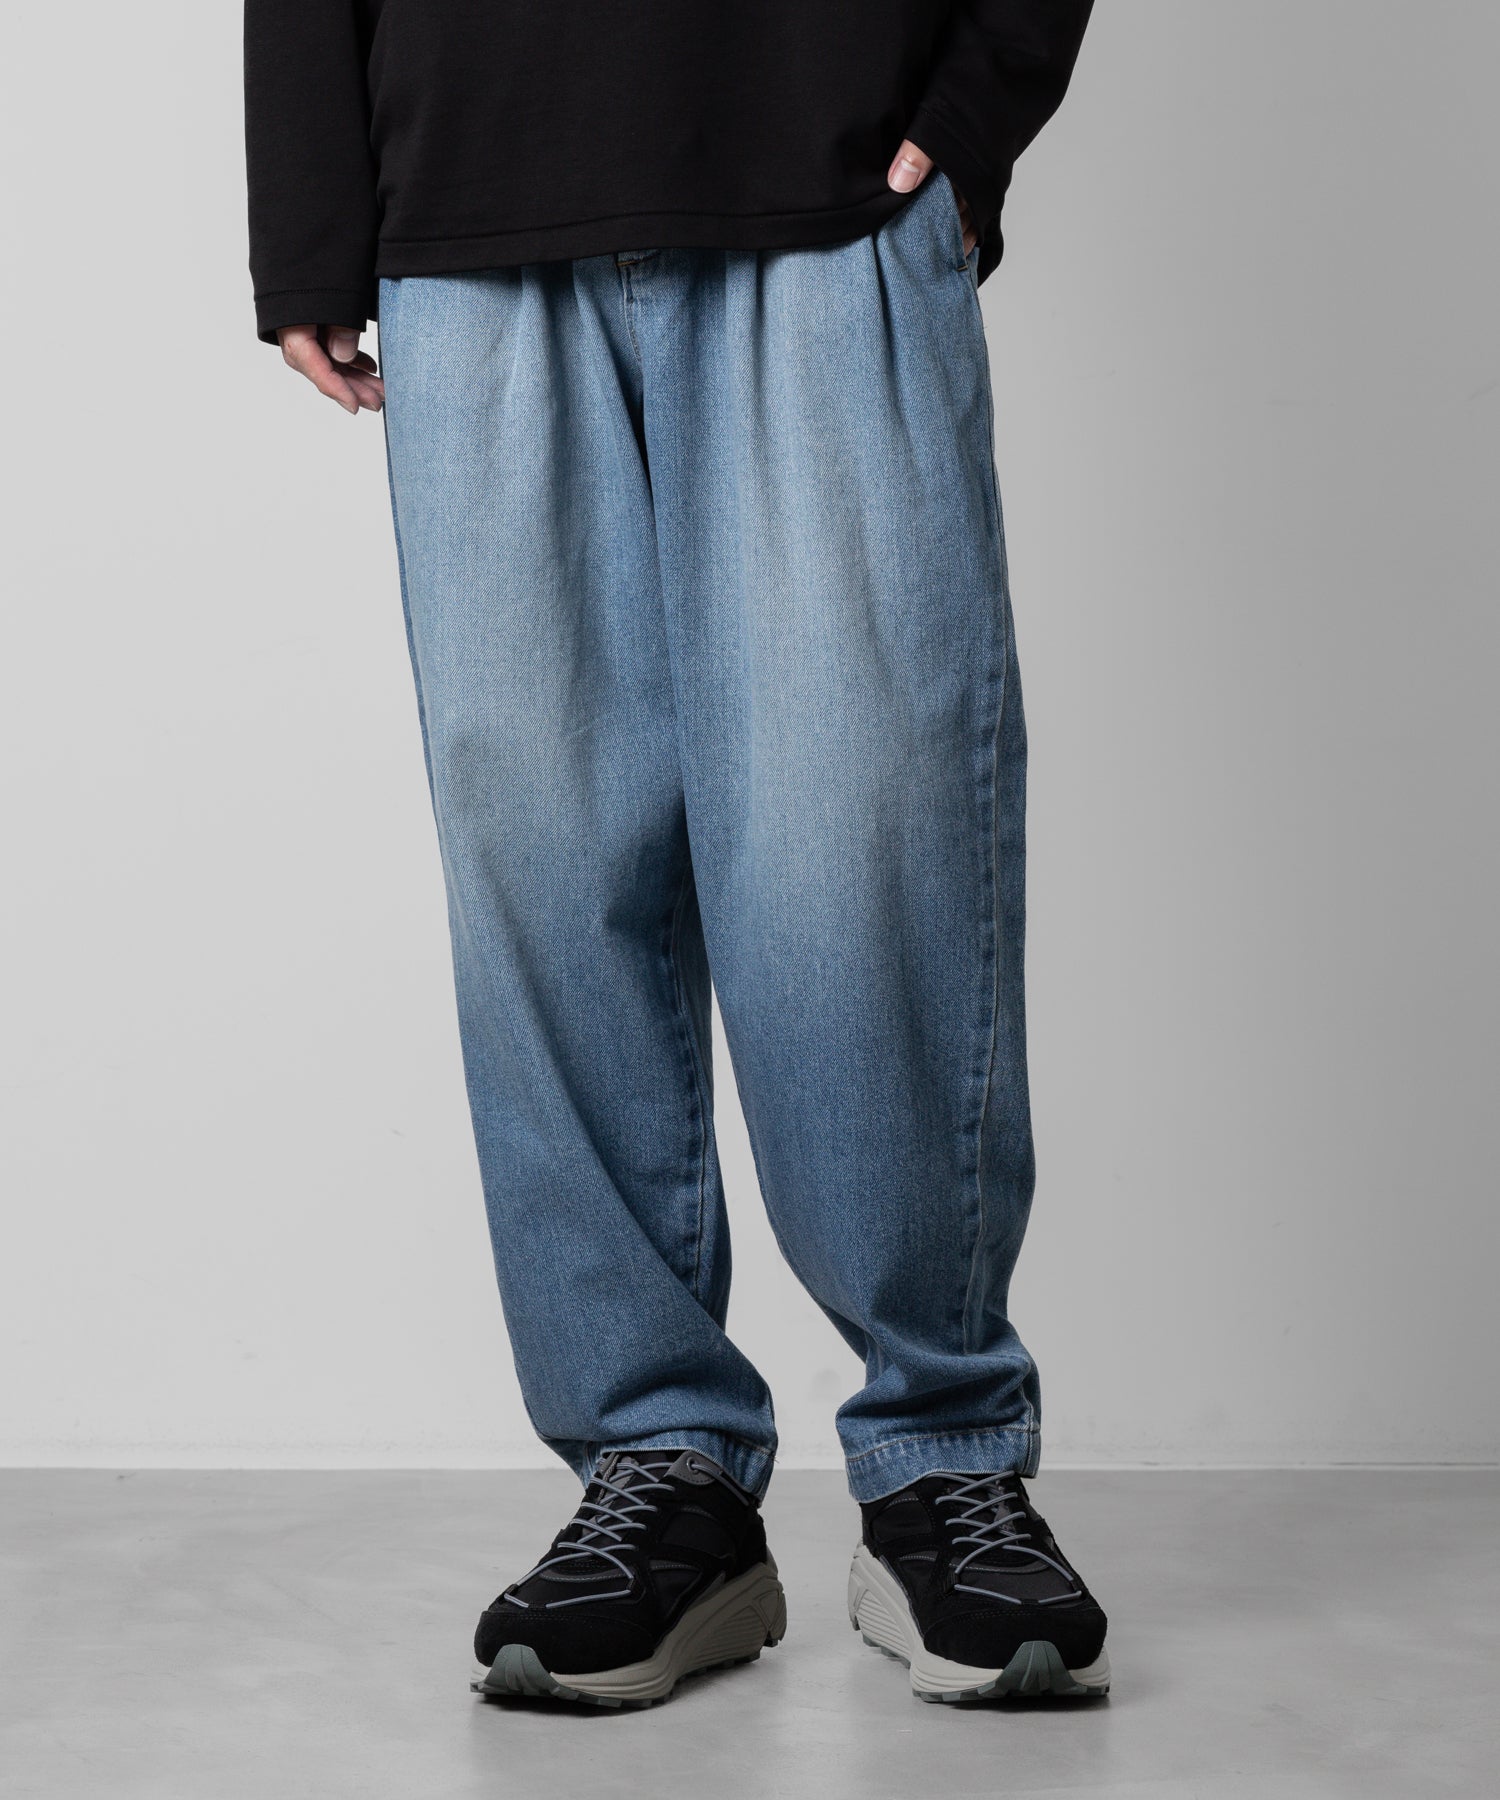 【ATTACHMENT】ATTACHMENT アタッチメントの11oz DENIM BELTED TAPERED FIT TROUSERS - NAVY 公式通販サイトsession福岡セレクトショップ